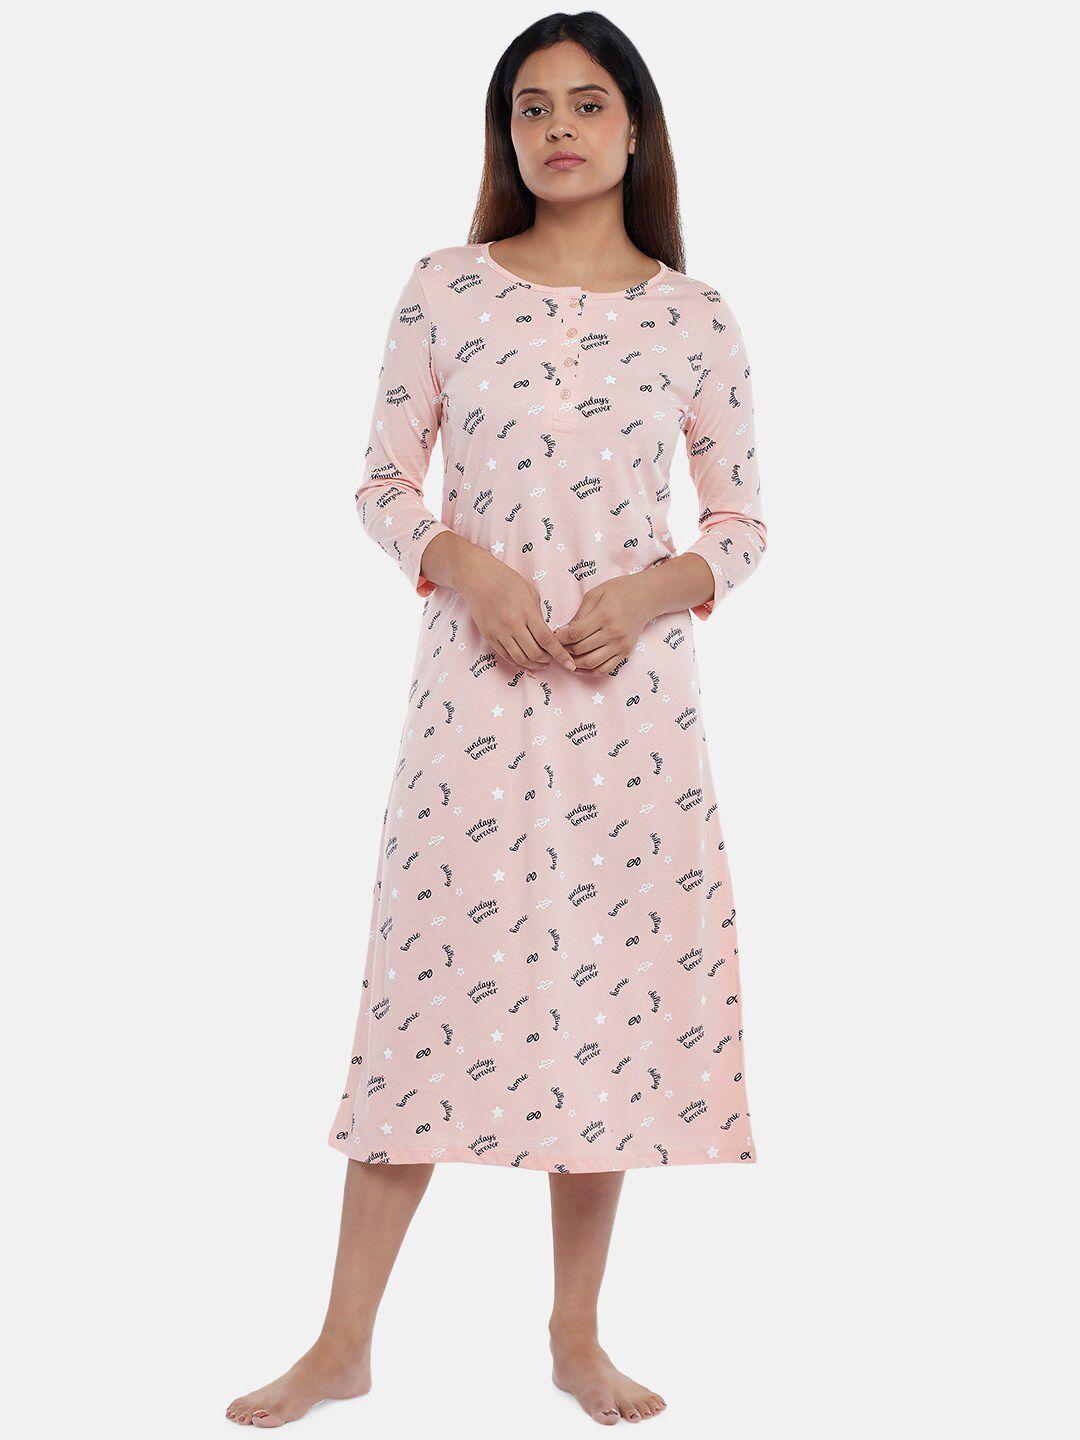 dreamz by pantaloons peach-coloured printed nightdress